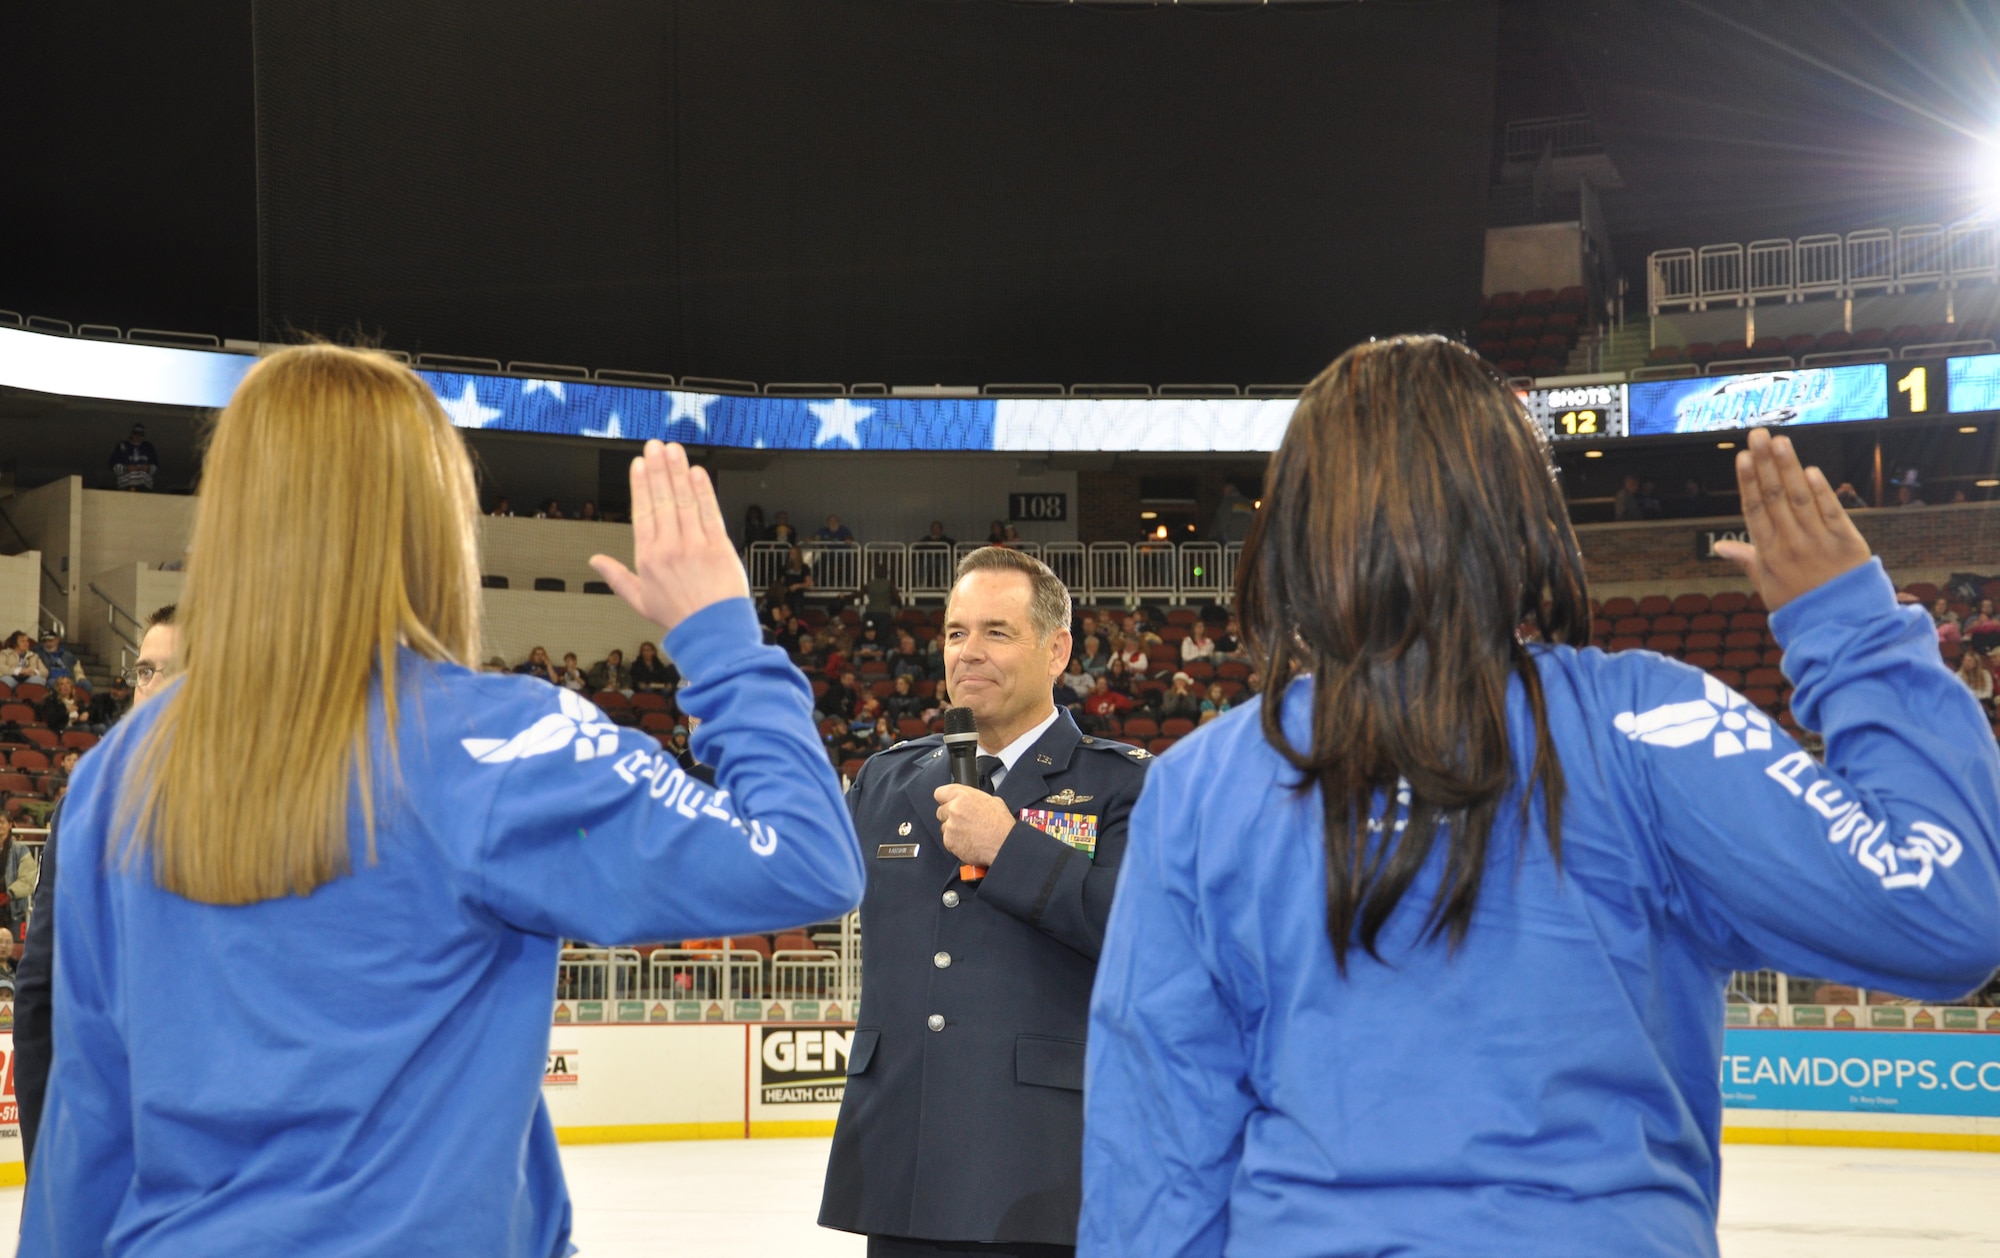 Colonel Mark S. Larson, 931st Air Refueling Group Commander, delivers the oath of enlistment during a swearing in ceremony of the first period intermission at the Wichita Thunder hockey game at Intrust Bank Arena, Dec. 7.  Six future 931st ARG members enlisted during the ceremony. (Air Force photo by Master Sgt. Brannen Parrish)